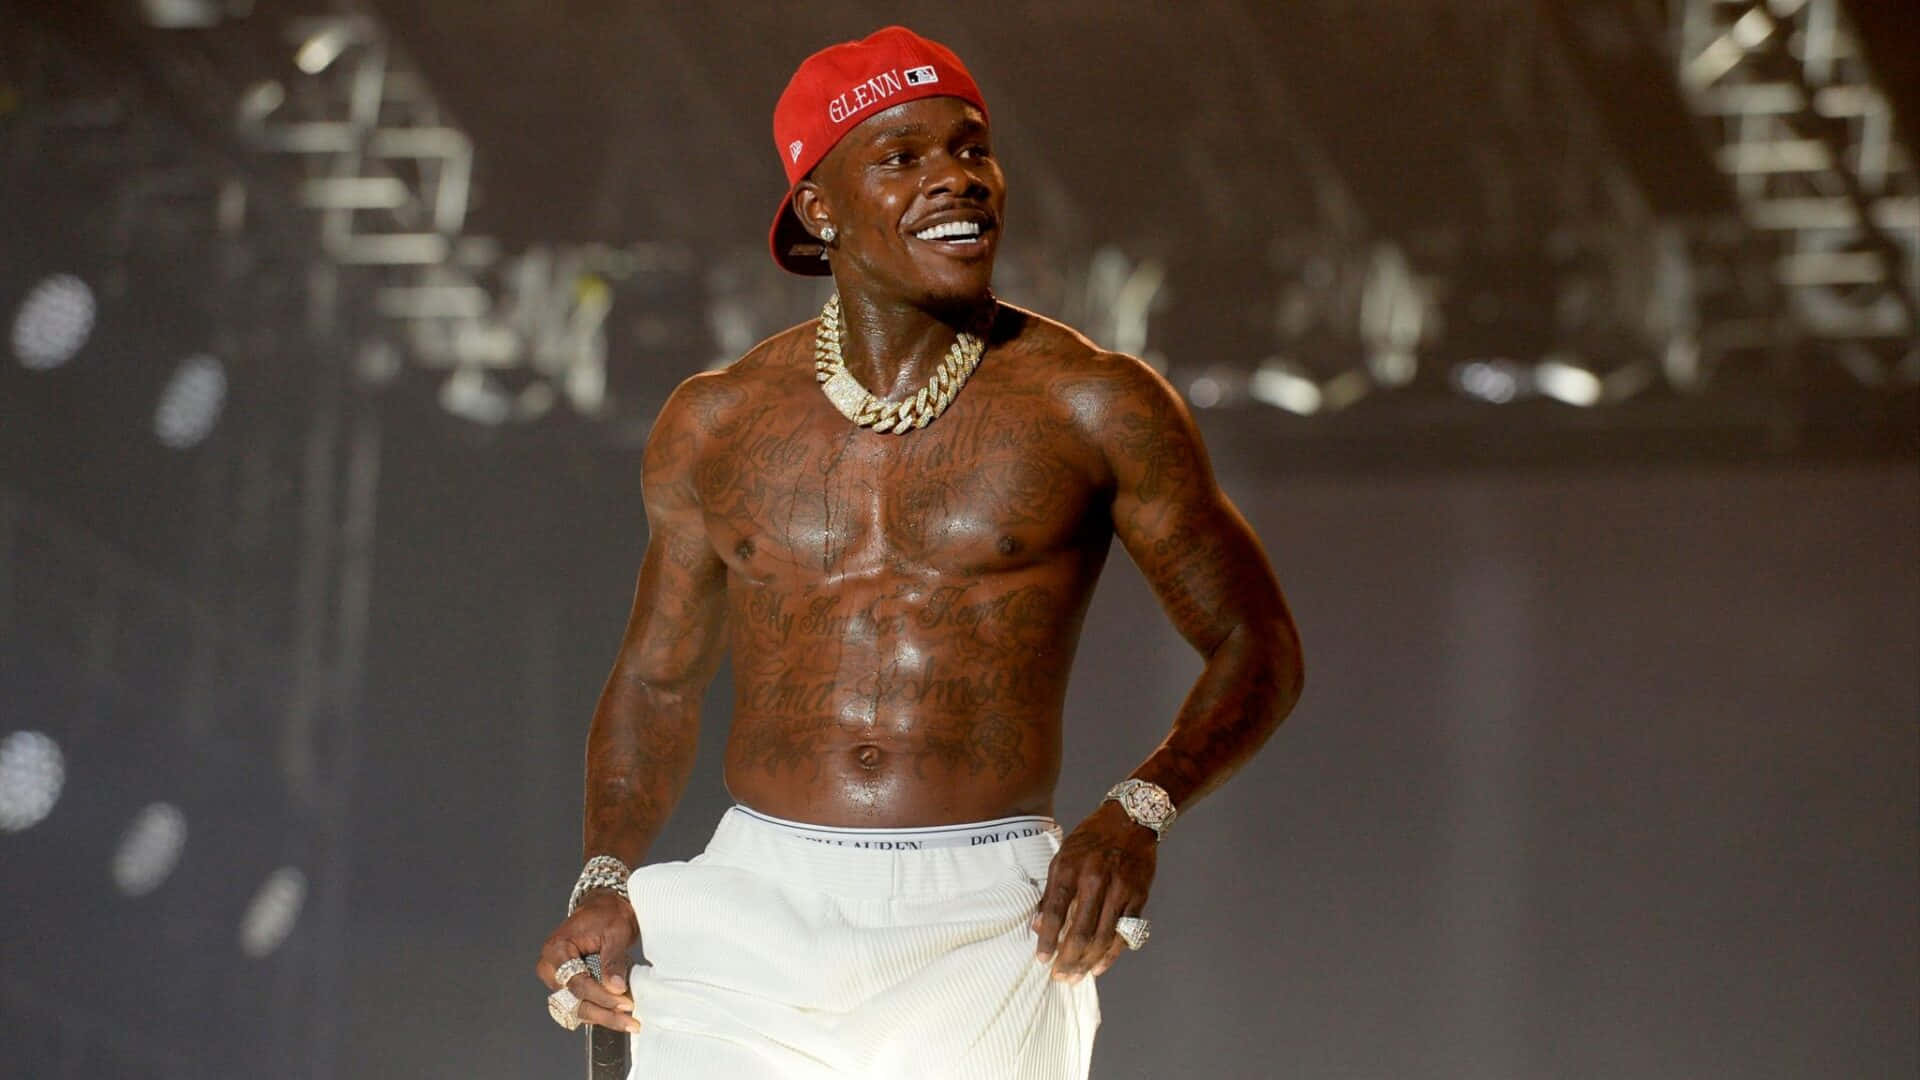 DaBaby Smiling in a Stylish Outfit